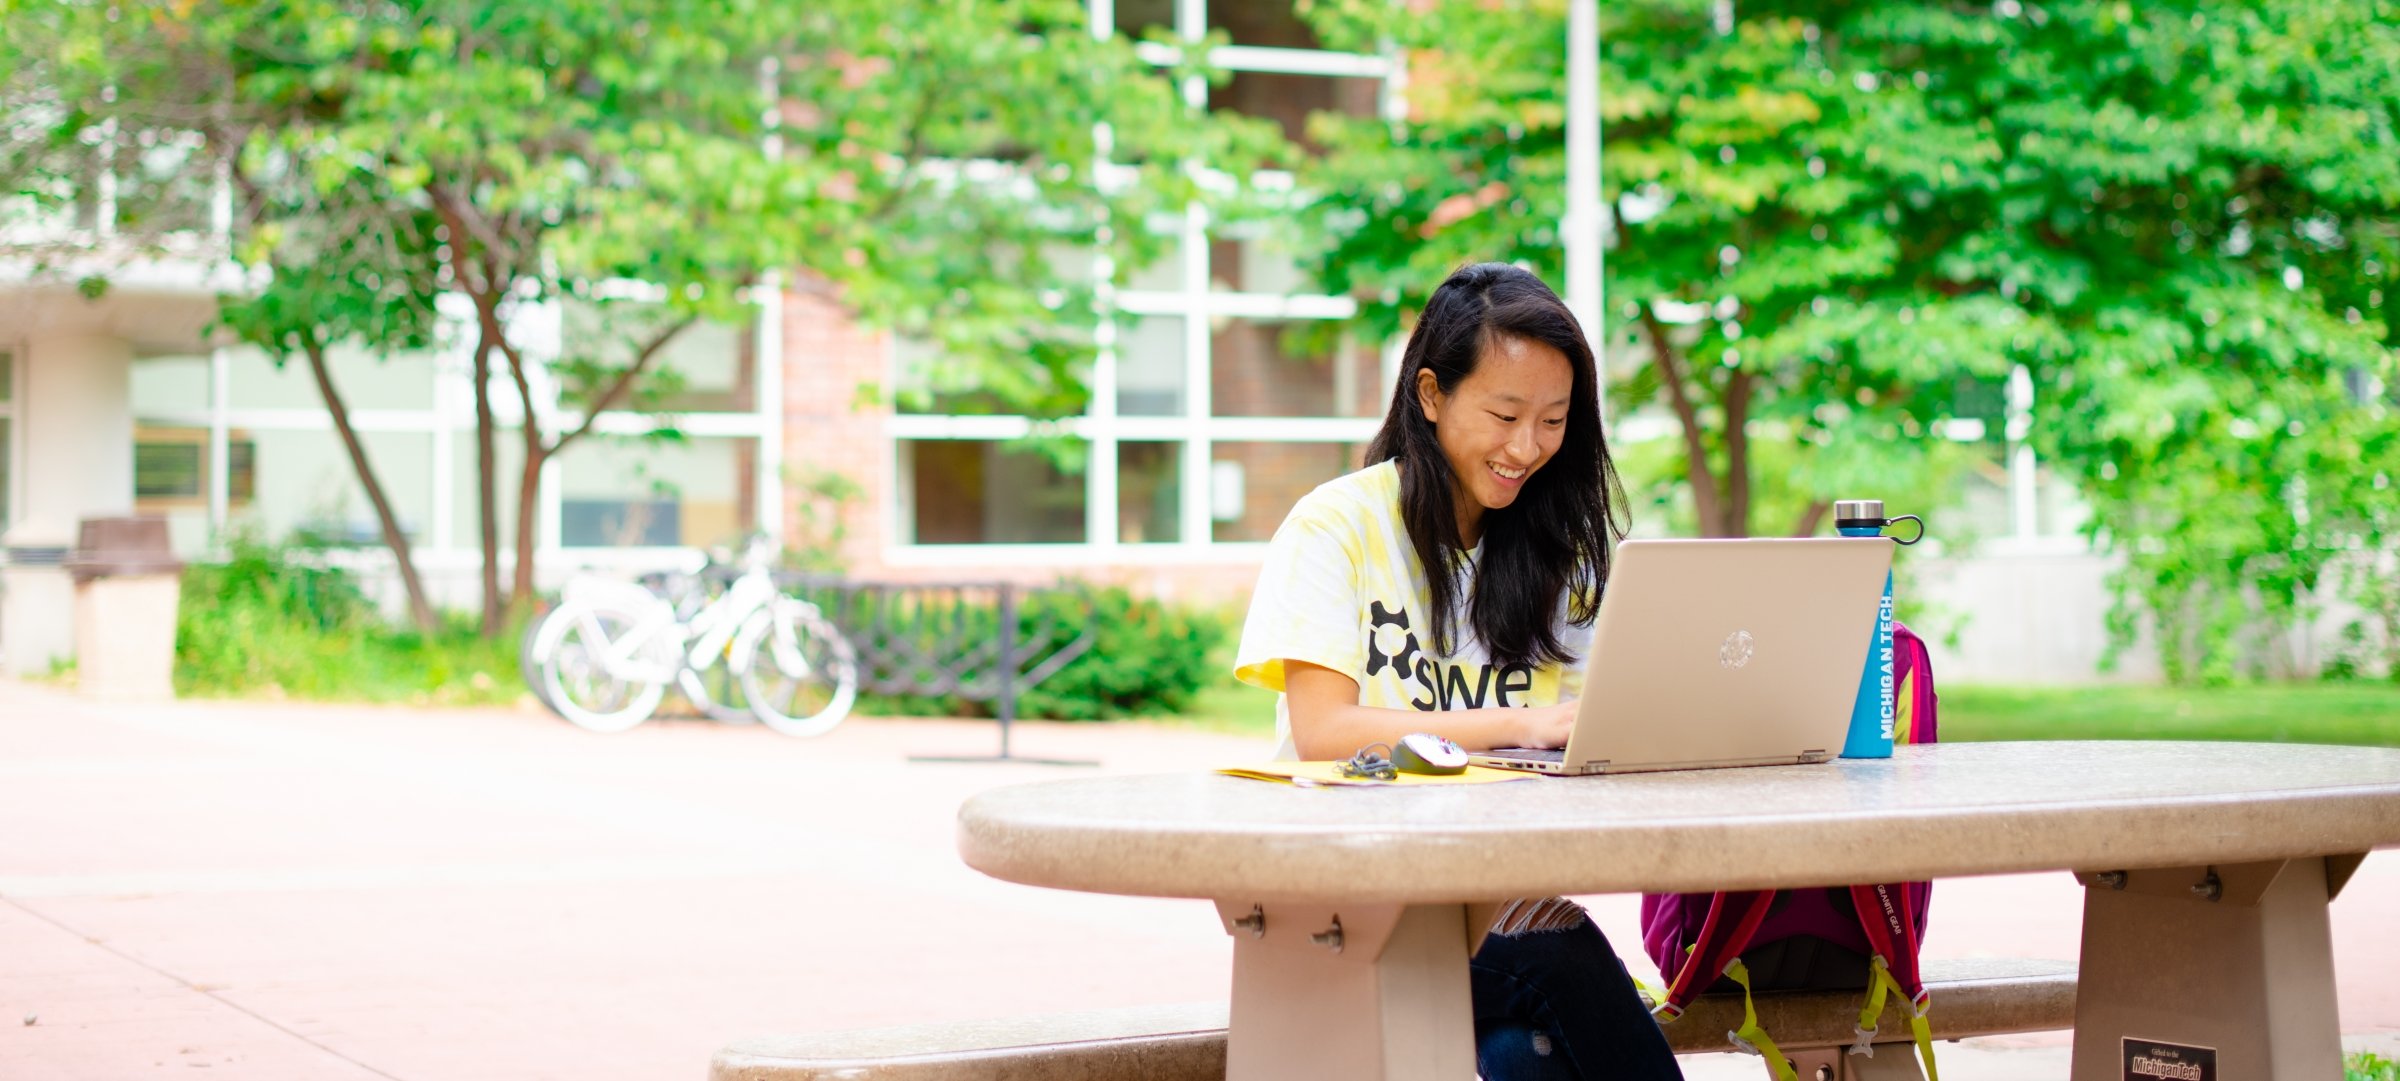 Michigan Tech student studies with a laptop outside on a picnic table.